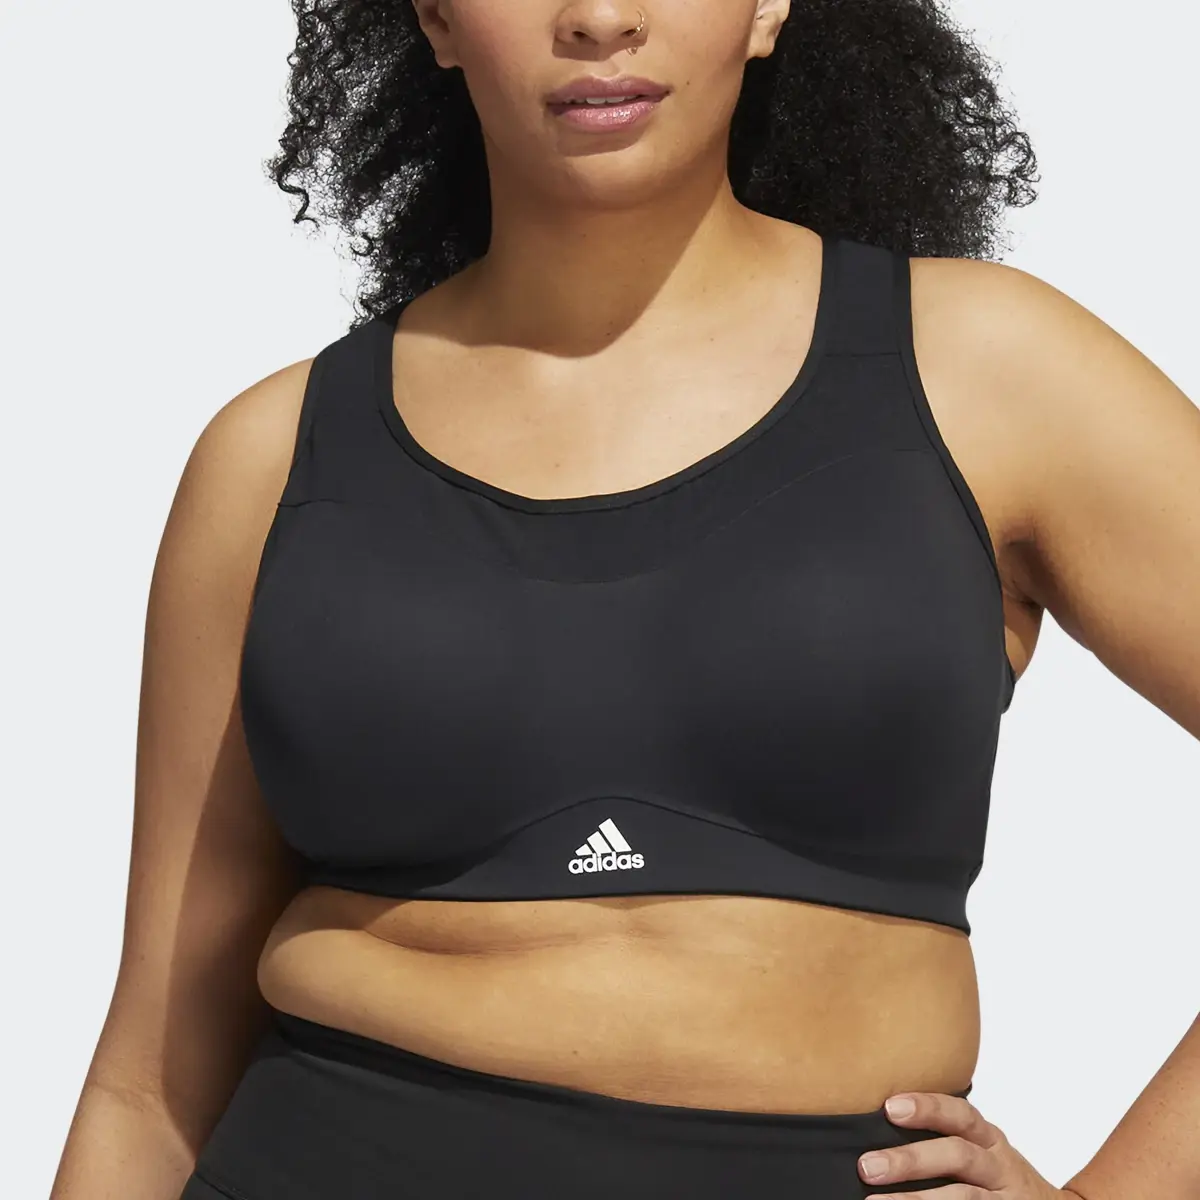 Adidas Brassière de training Maintien fort adidas TLRD Impact (Grandes tailles). 1